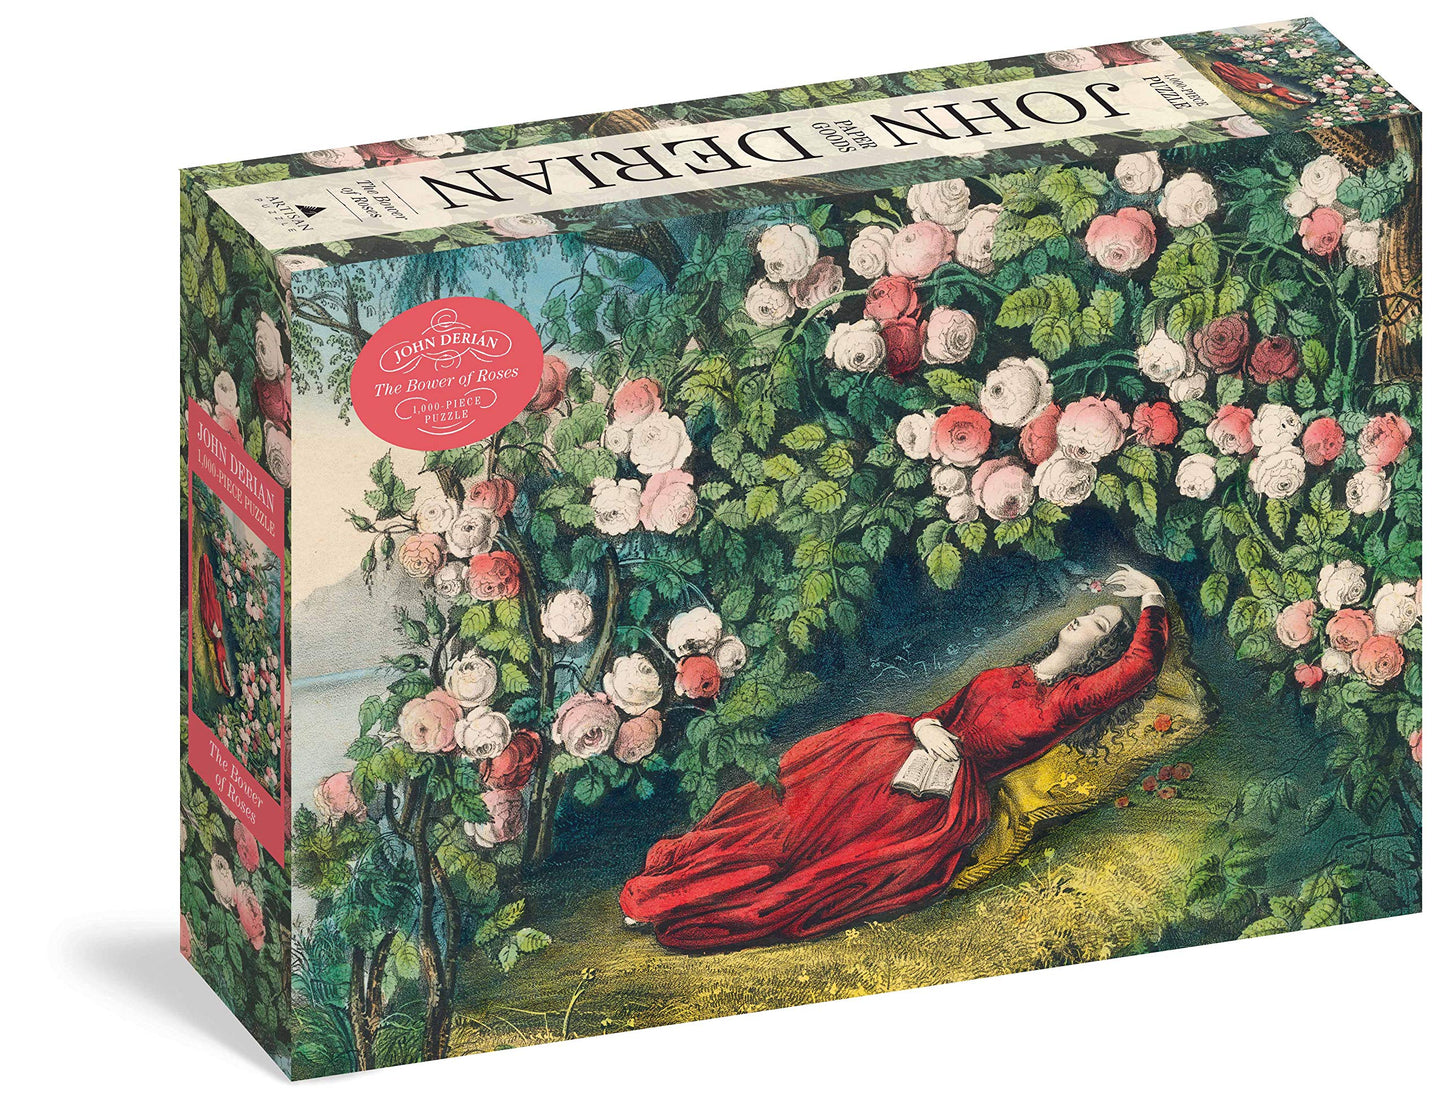 Puzzle: John Derian Paper Goods - The Bower of Roses 1000 Pieces